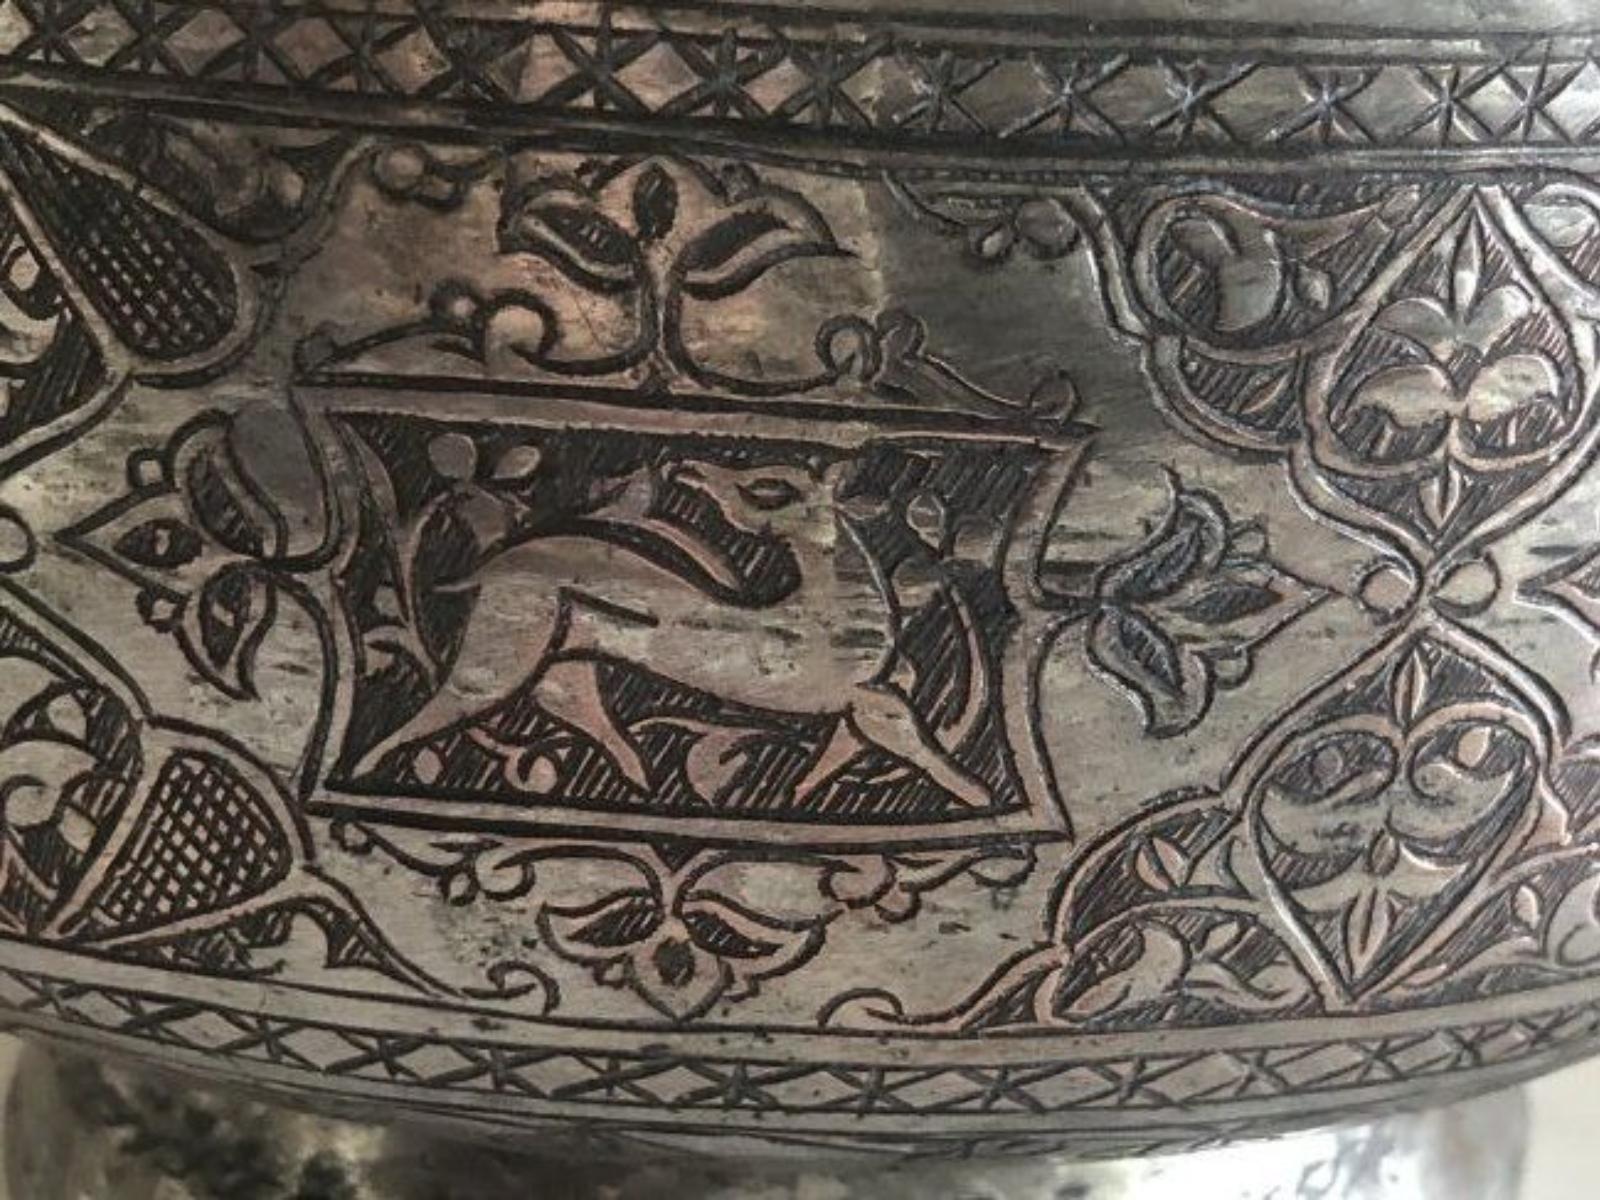 Very beautiful hand done Persian Safavid (1501 to 1736) tinned copper bowl with a calligraphy and engravings of flowers and animals. A museum quality piece.Dimensions: 10